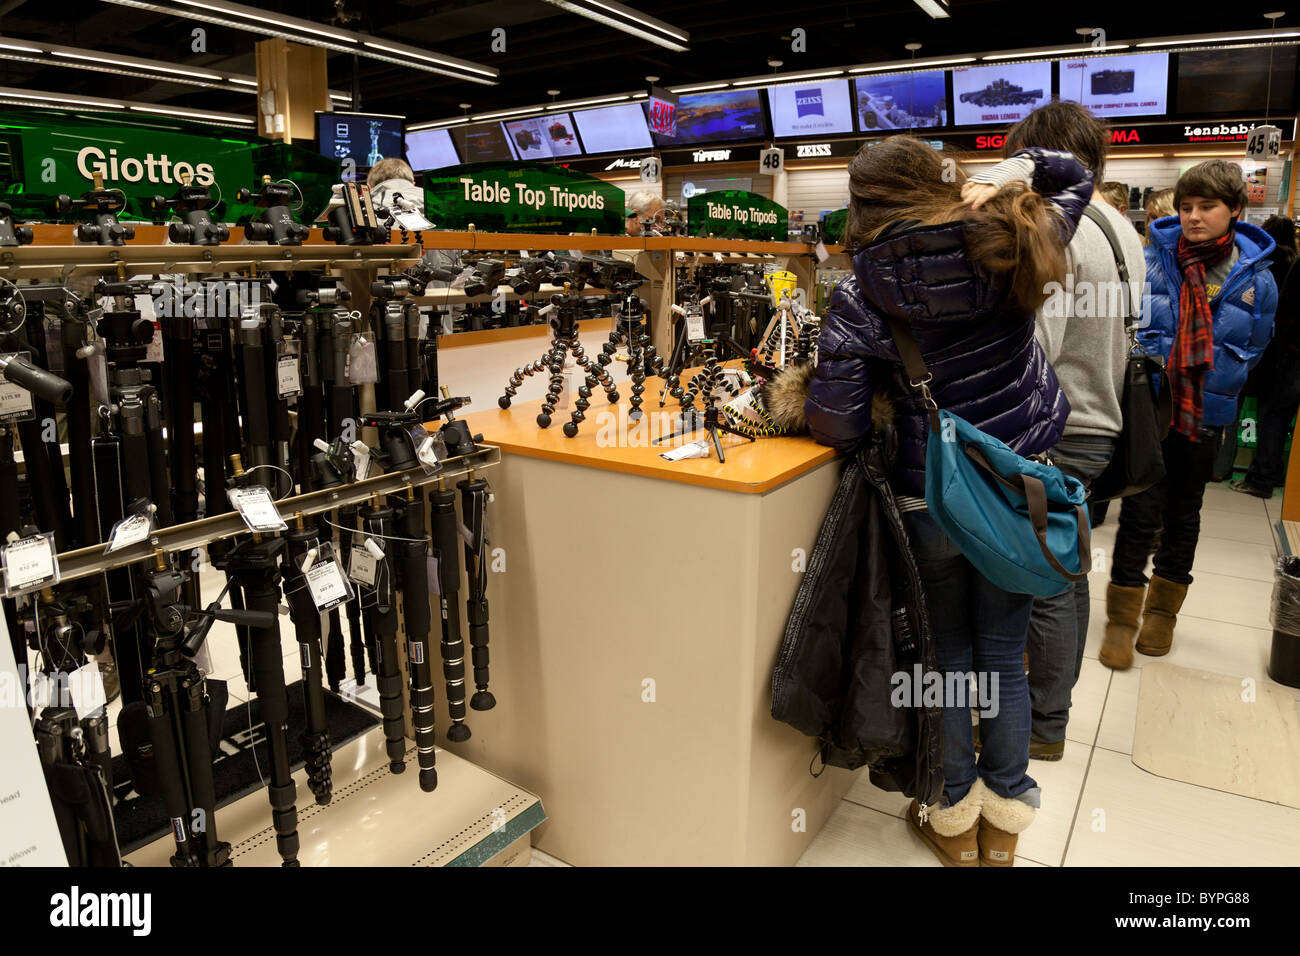 B&h Photo Store High Resolution Stock Photography and Images - Alamy